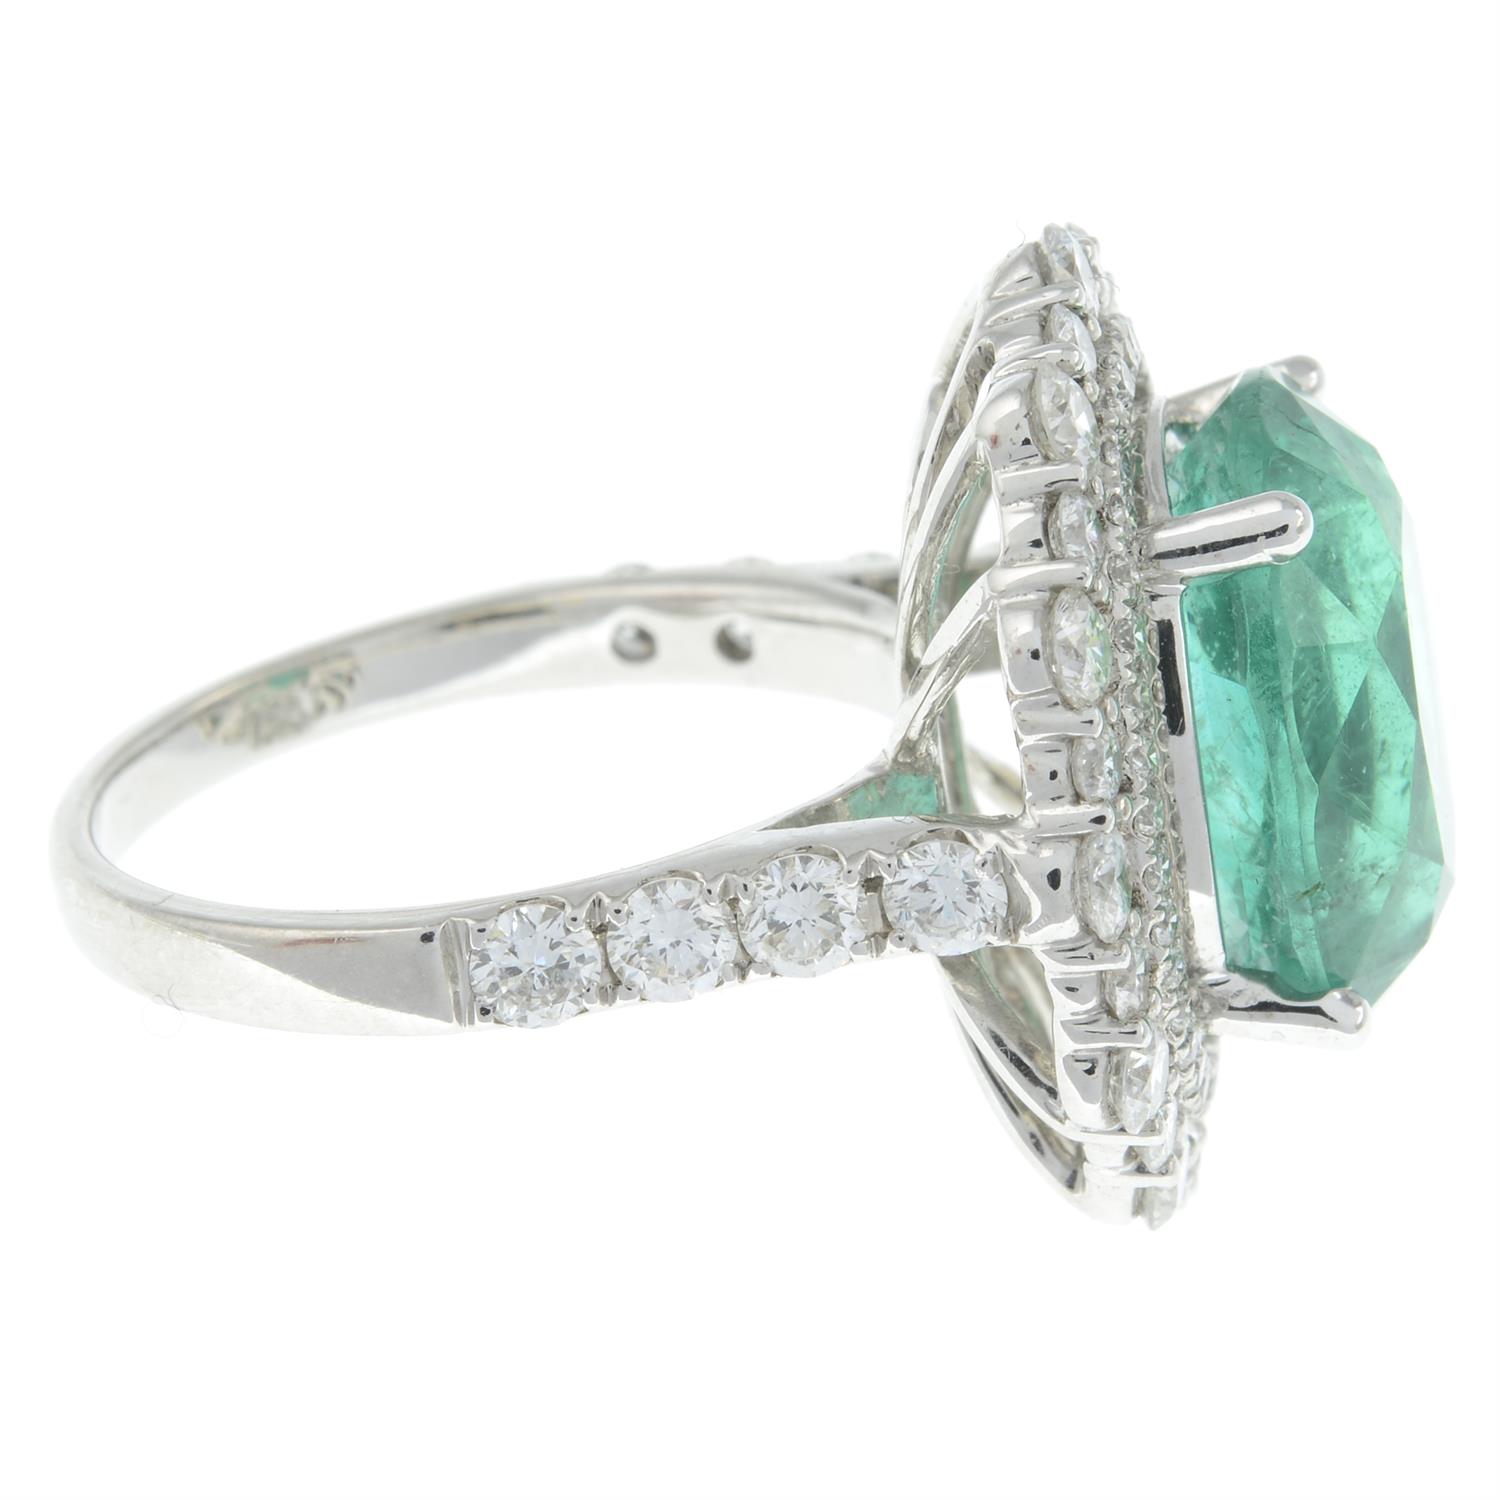 Emerald and diamond ring - Image 5 of 6